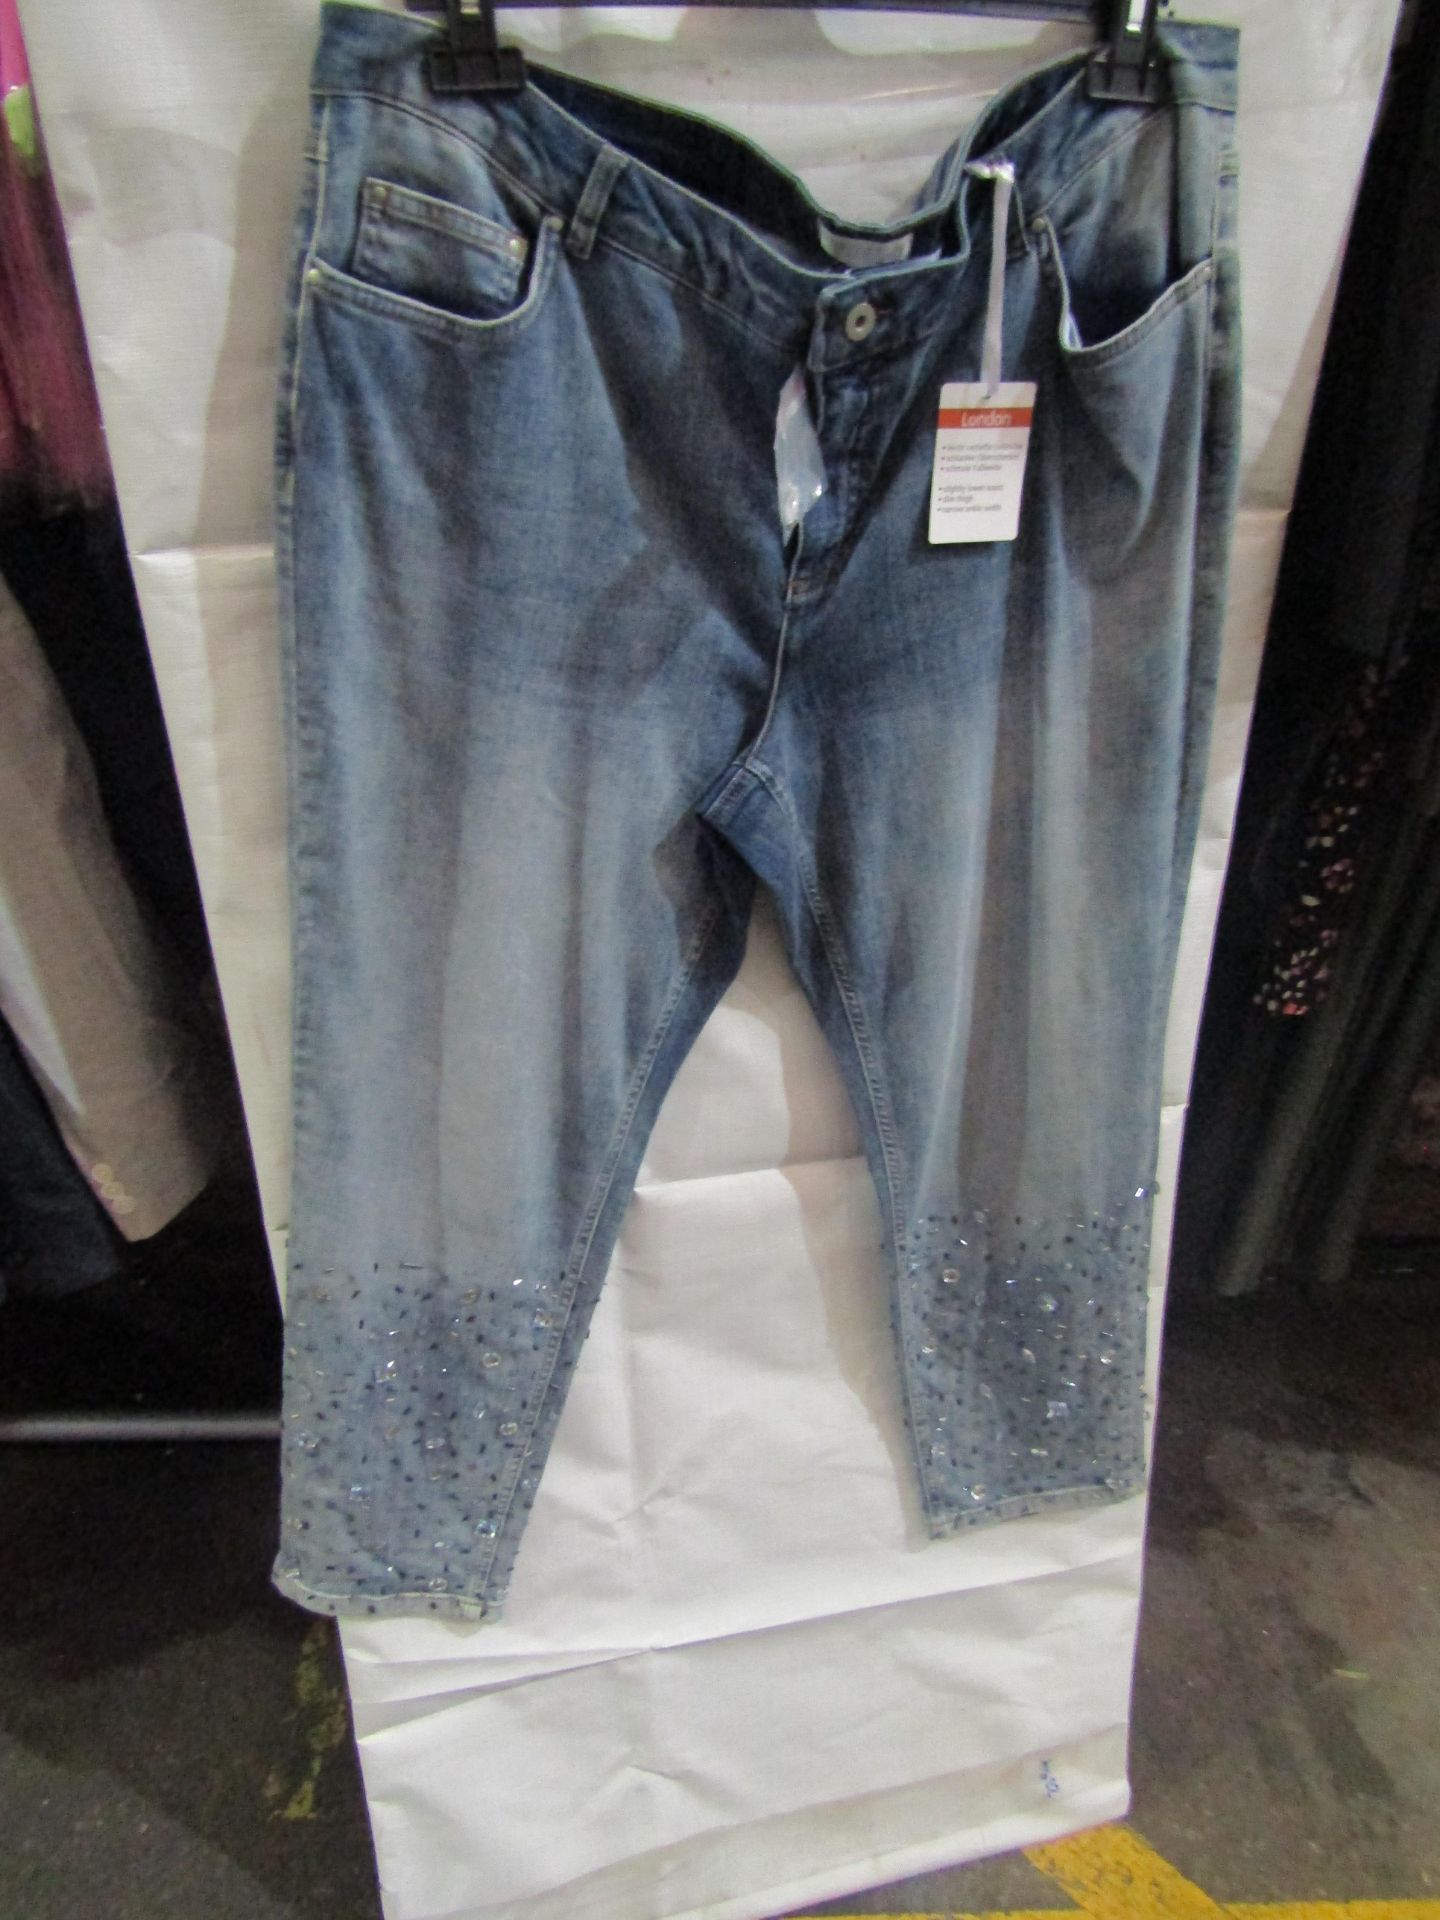 CreationL Ladies Jeans With Gems On The Bottom Of The Legs, Size: 22p - Good Condition.